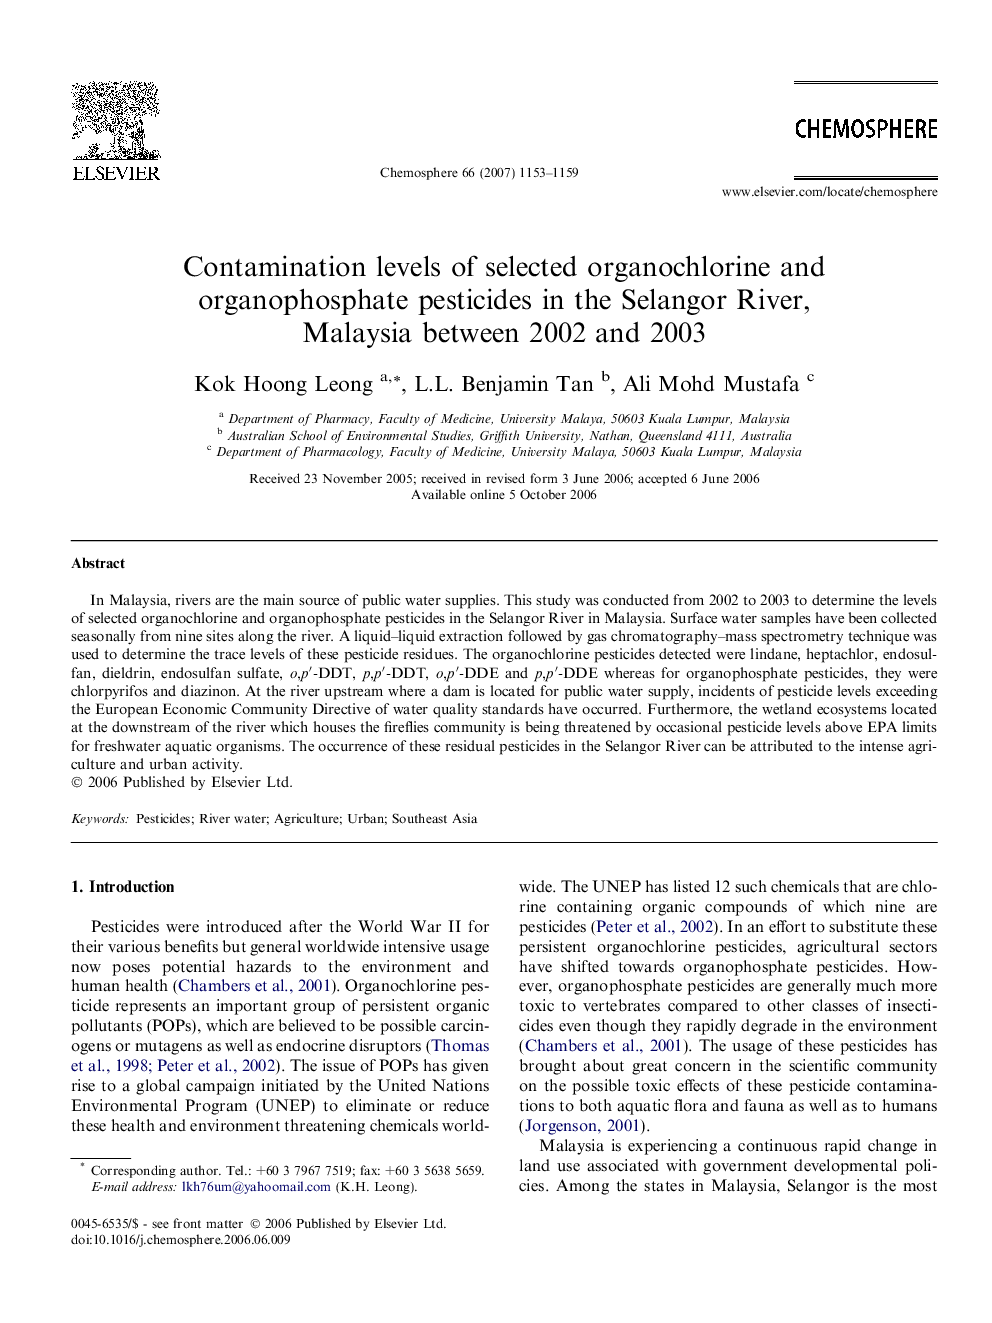 Contamination levels of selected organochlorine and organophosphate pesticides in the Selangor River, Malaysia between 2002 and 2003